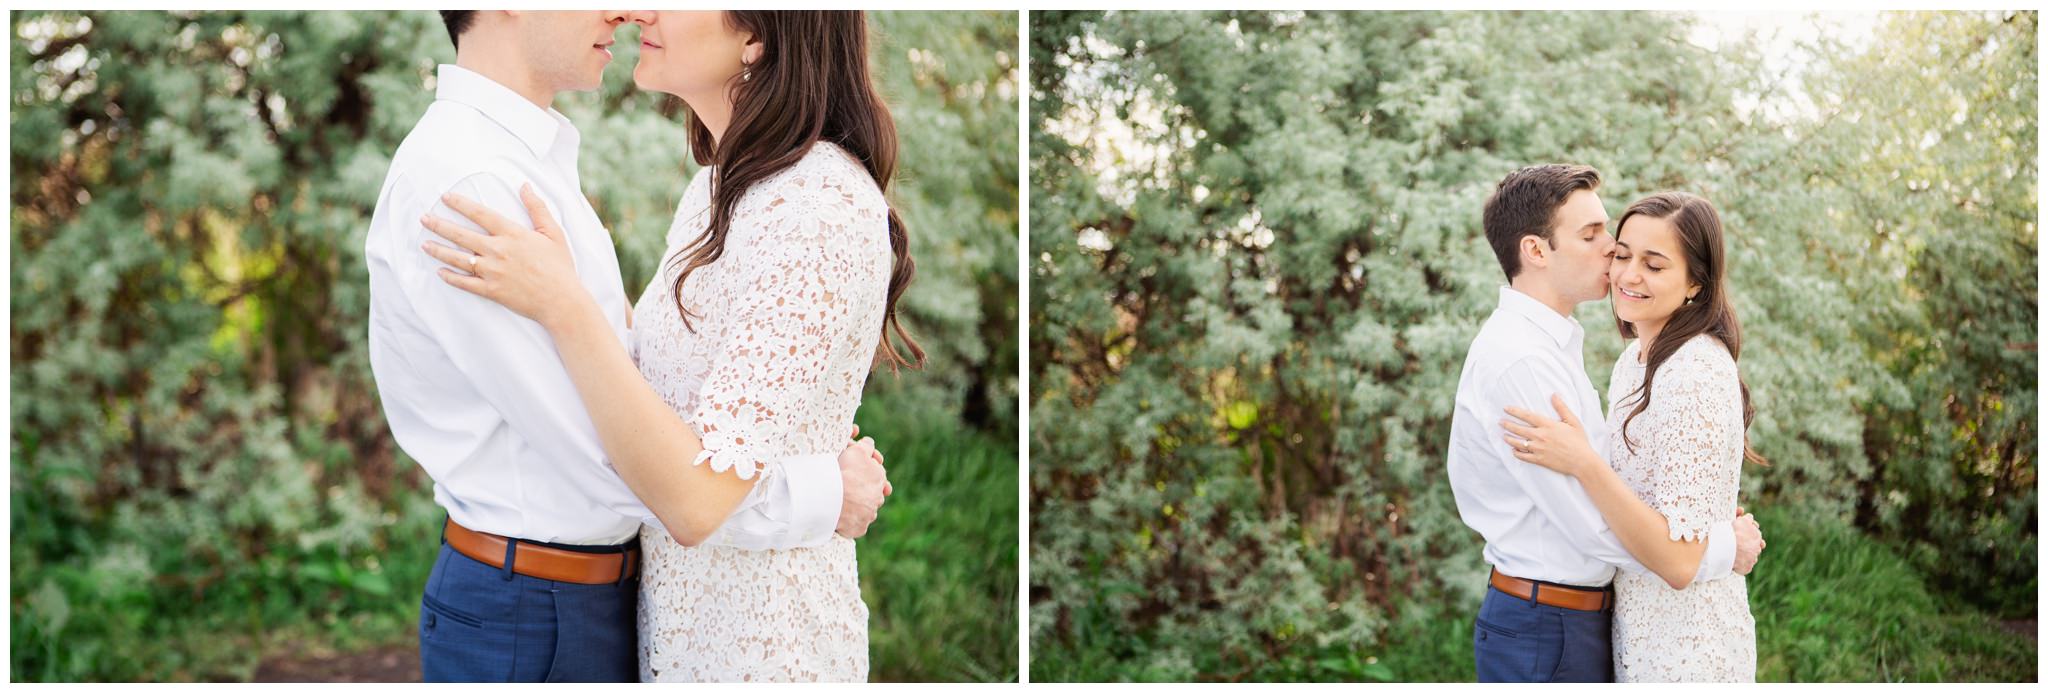 Engagement session at Tunnel Springs